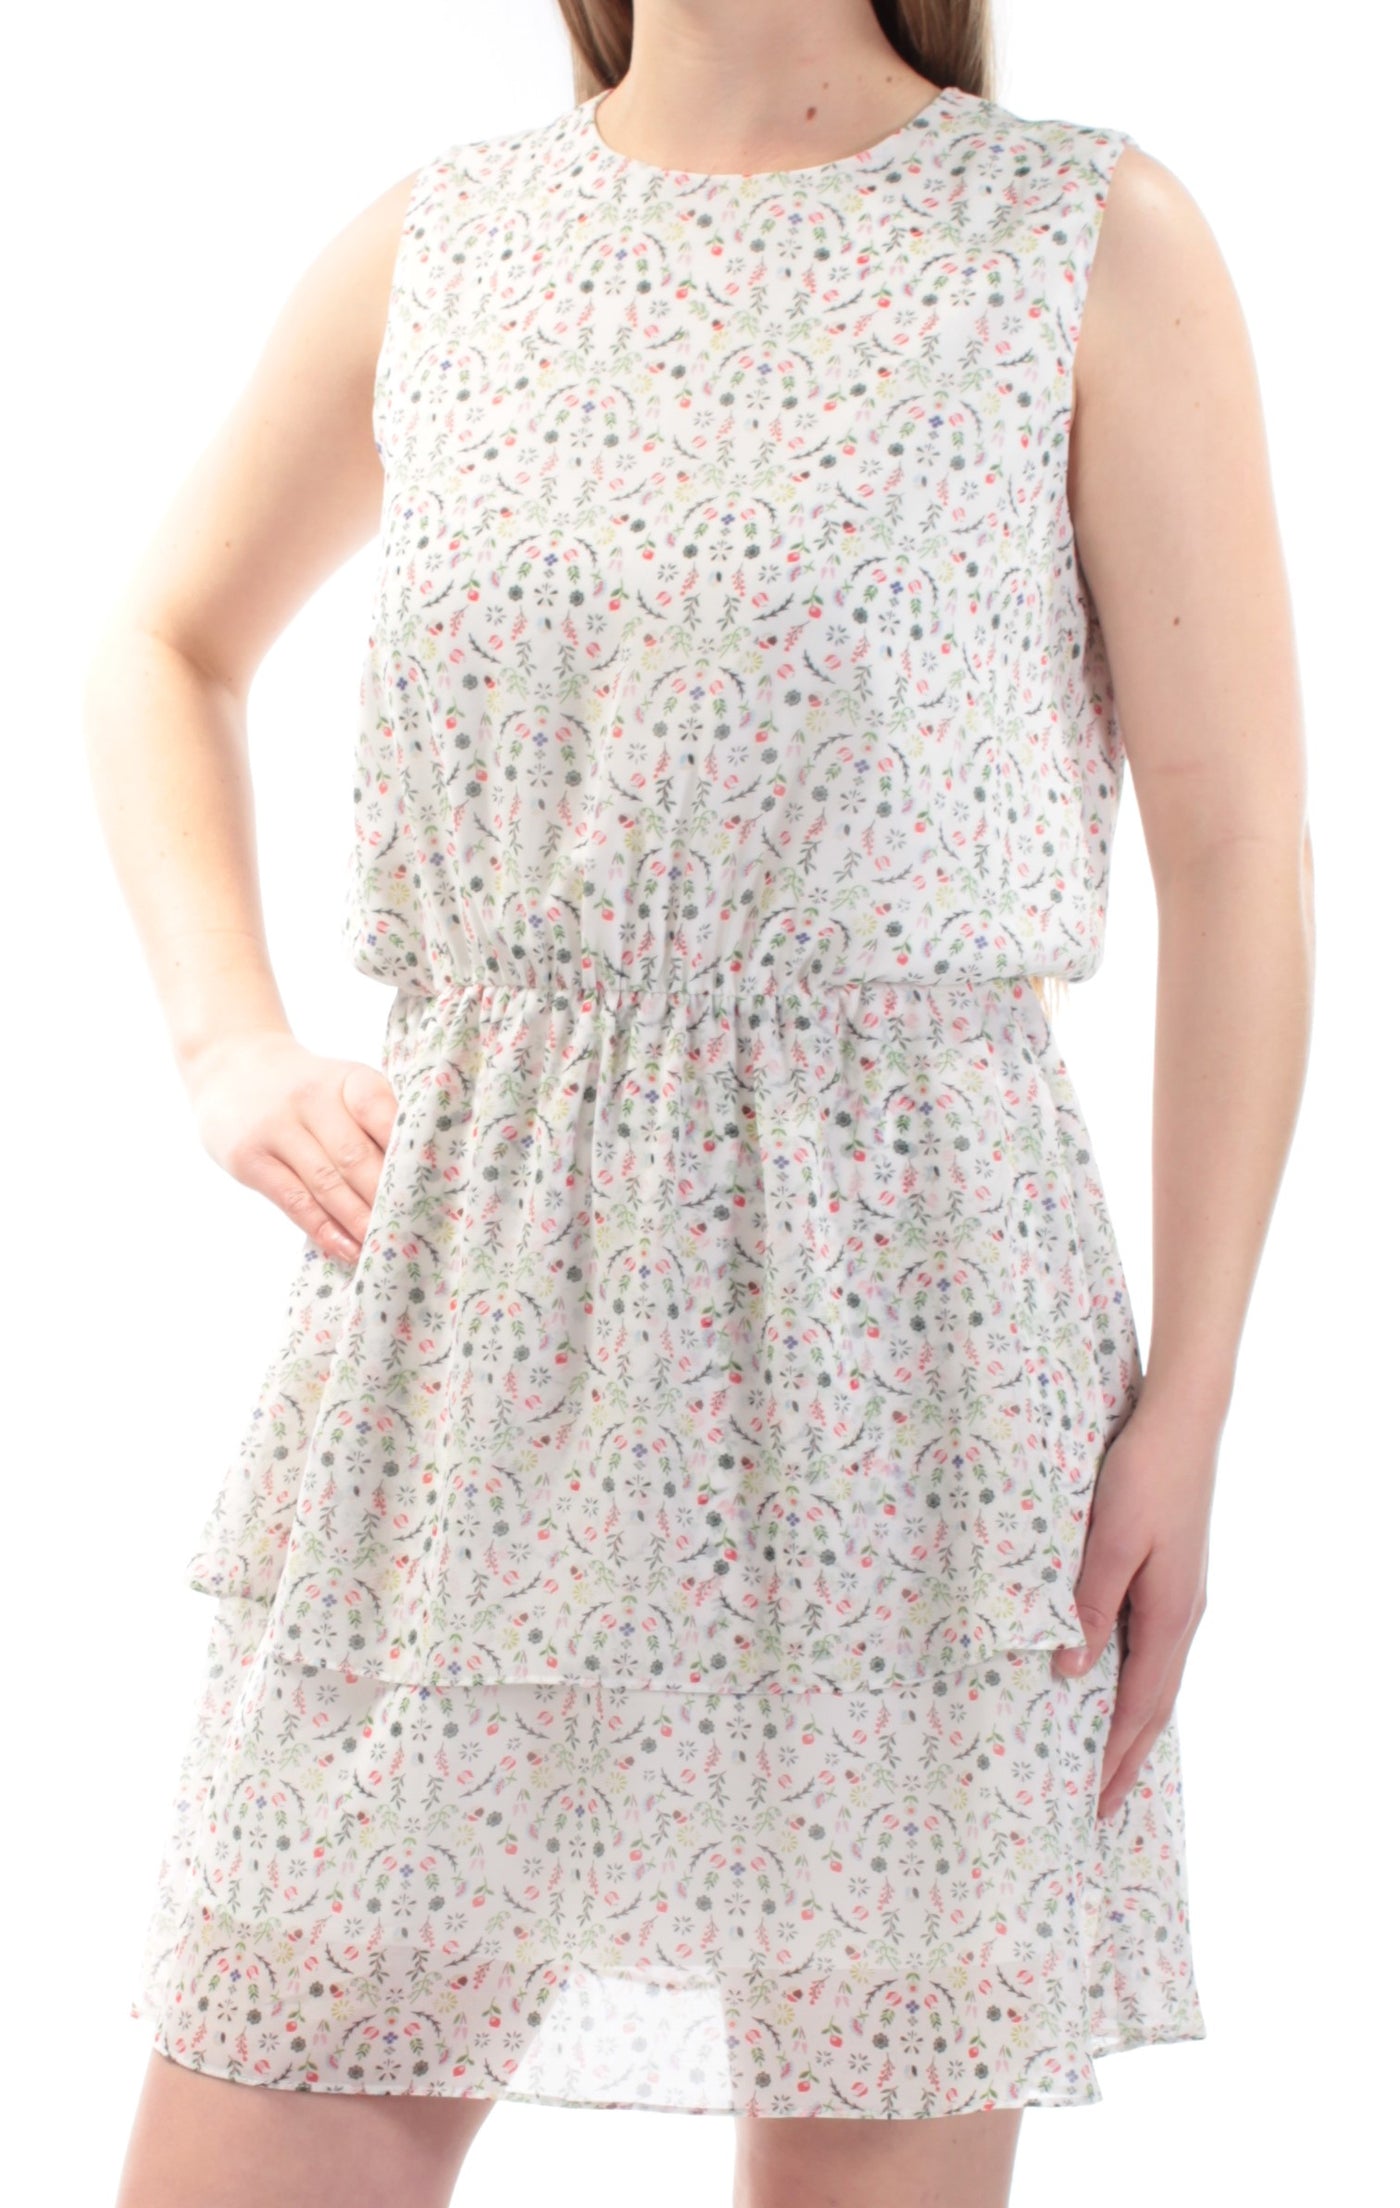 CYNTHIA ROWLEY Womens Floral Sleeveless Jewel Neck Above The Knee Layered Dress